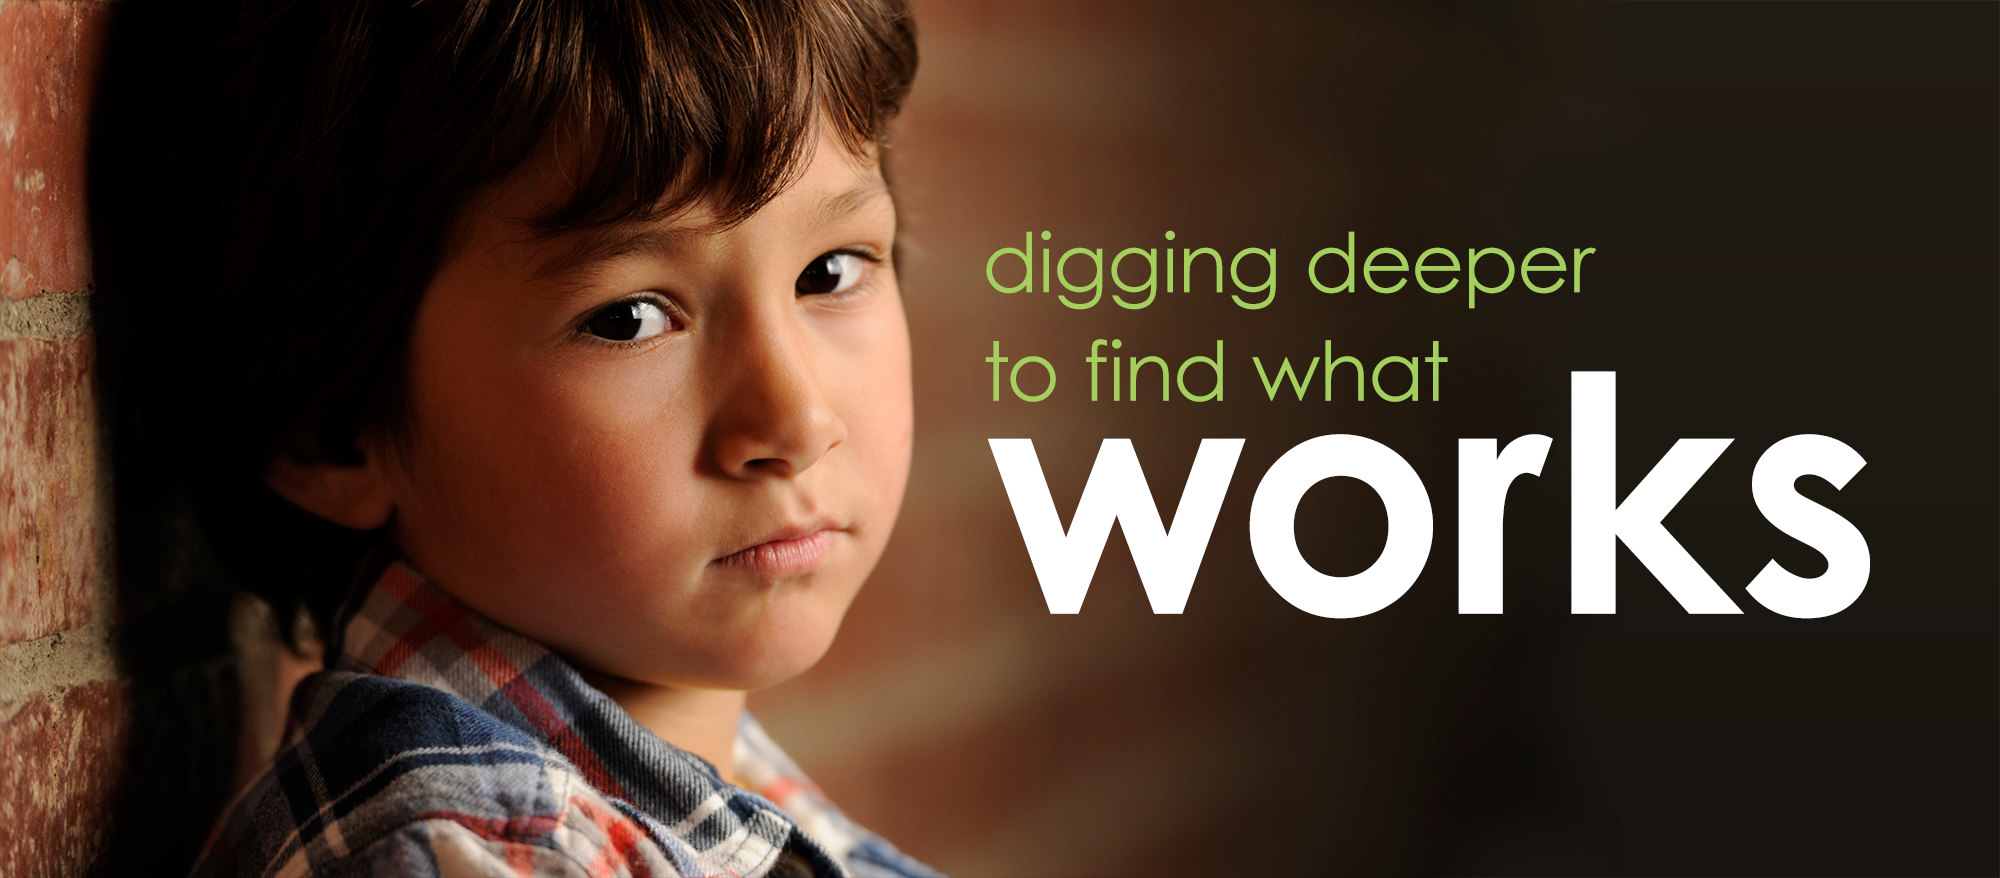 Digging deeper to find what works.